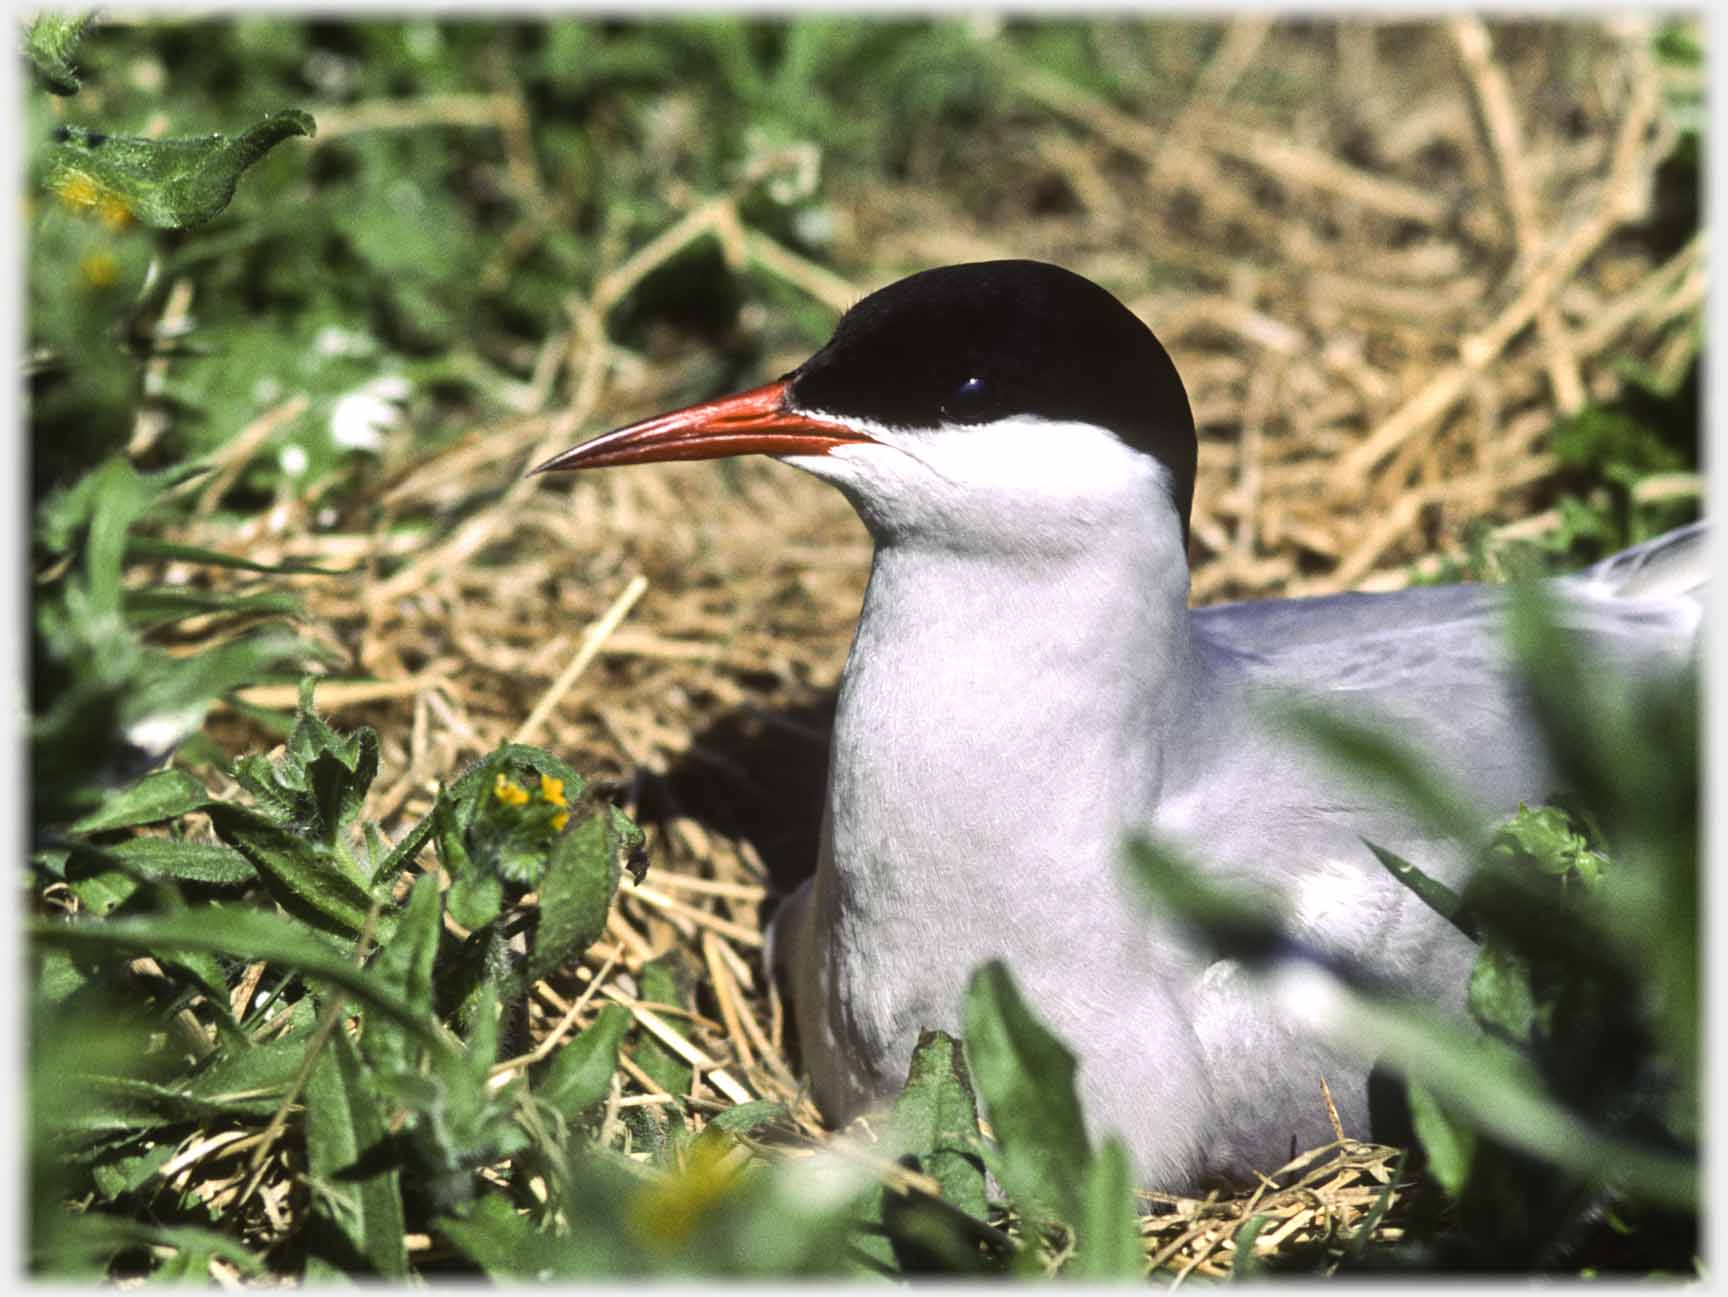 Head and front of tern sitting on nest, beak closed.